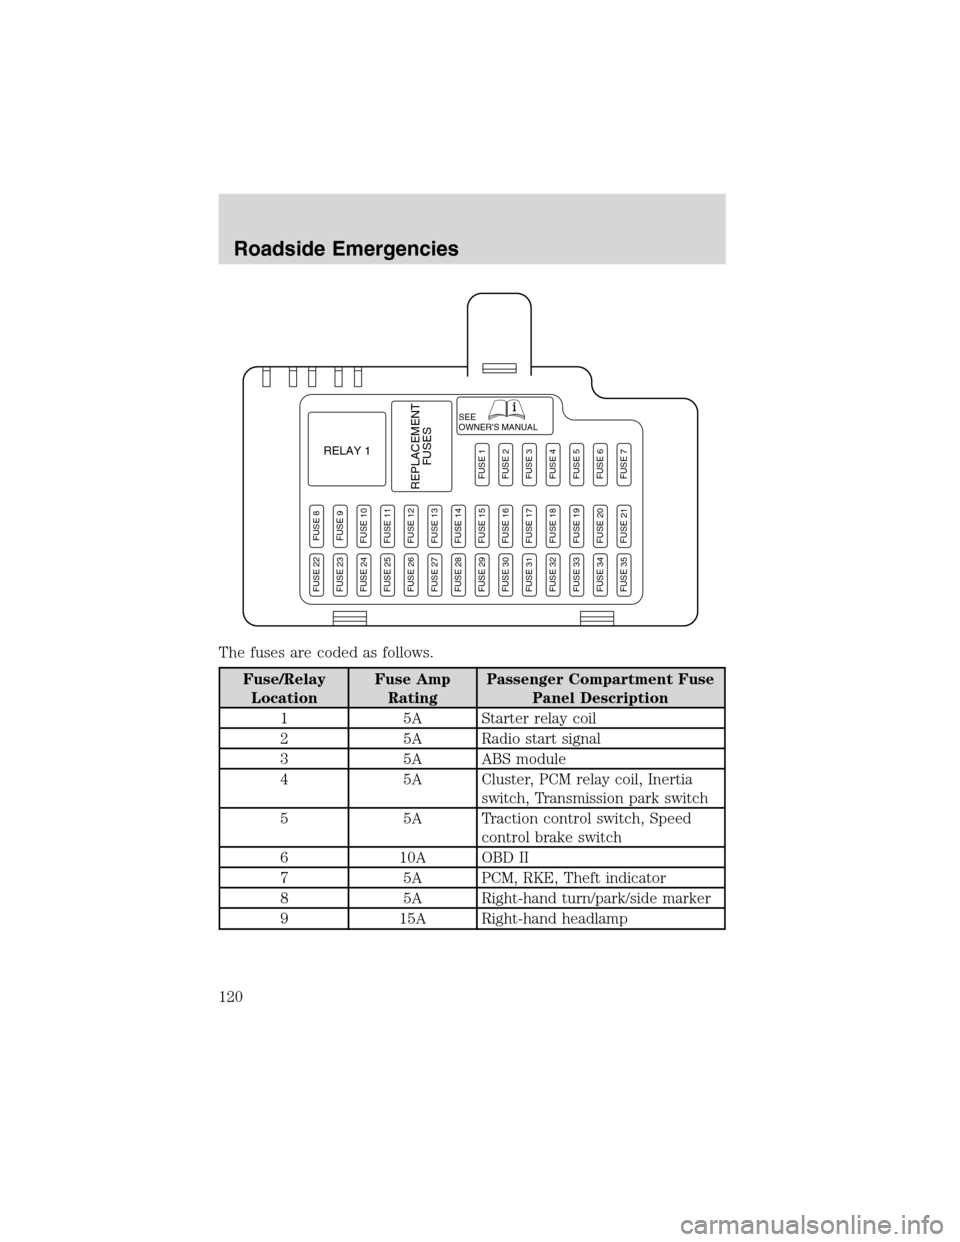 FORD THUNDERBIRD 2003 11.G Owners Manual The fuses are coded as follows.
Fuse/Relay
LocationFuse Amp
RatingPassenger Compartment Fuse
Panel Description
1 5A Starter relay coil
2 5A Radio start signal
3 5A ABS module
4 5A Cluster, PCM relay c